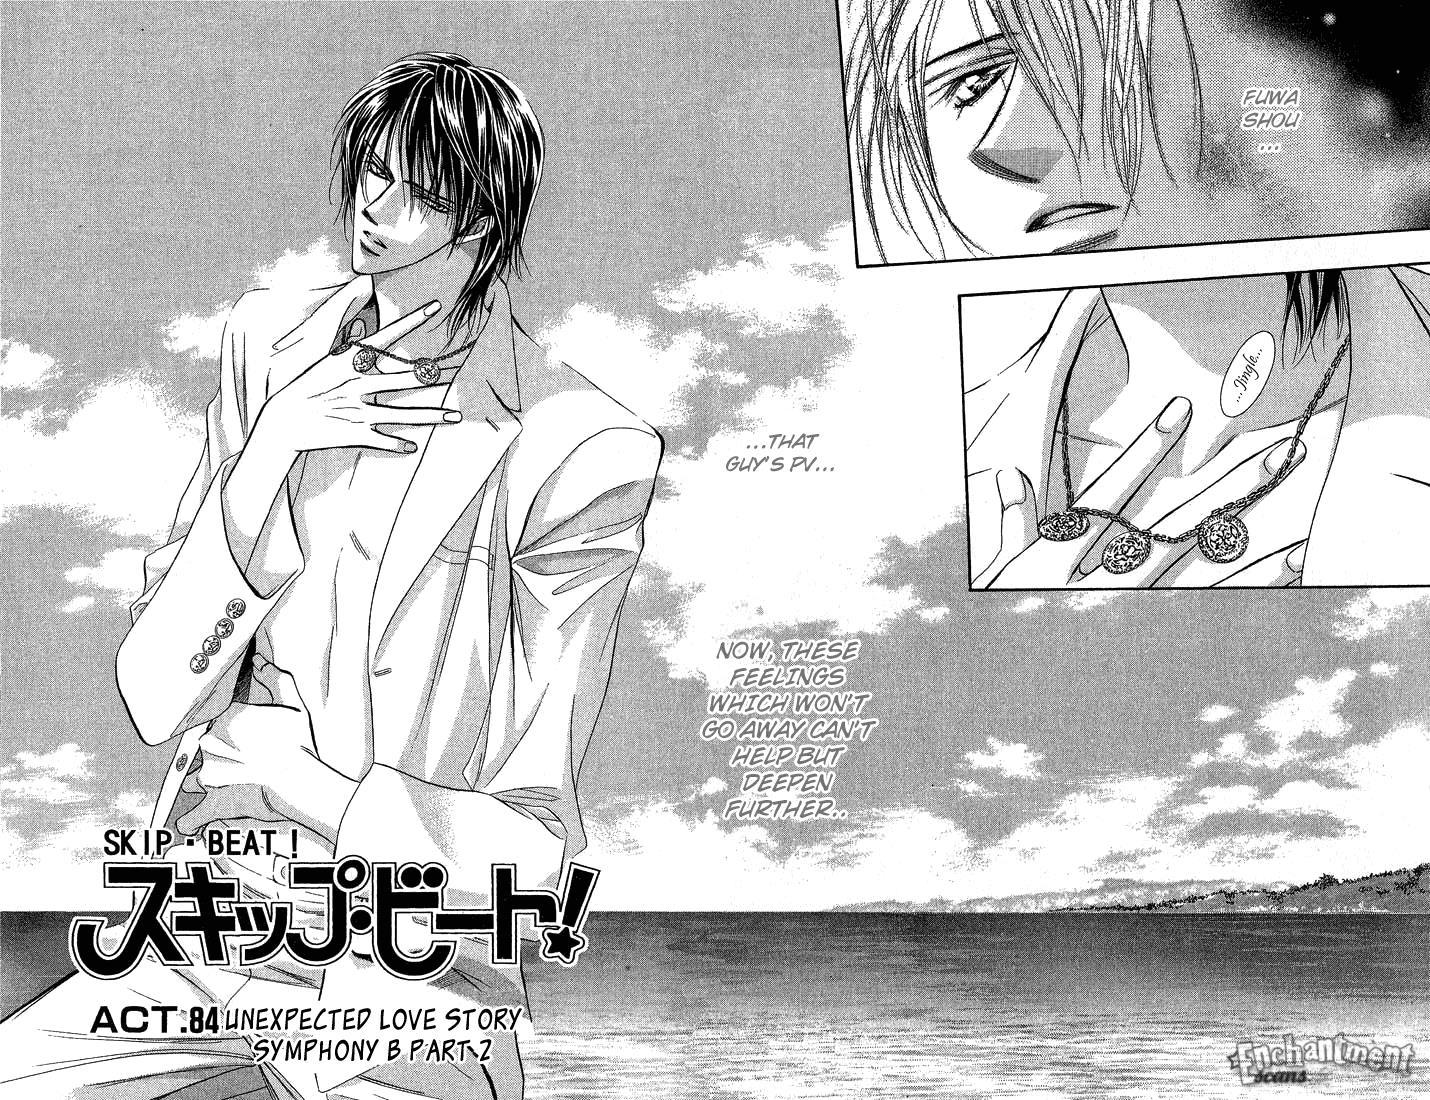 Skip Beat!, Chapter 84 Suddenly, a Love Story- Section B, Part 2 image 03